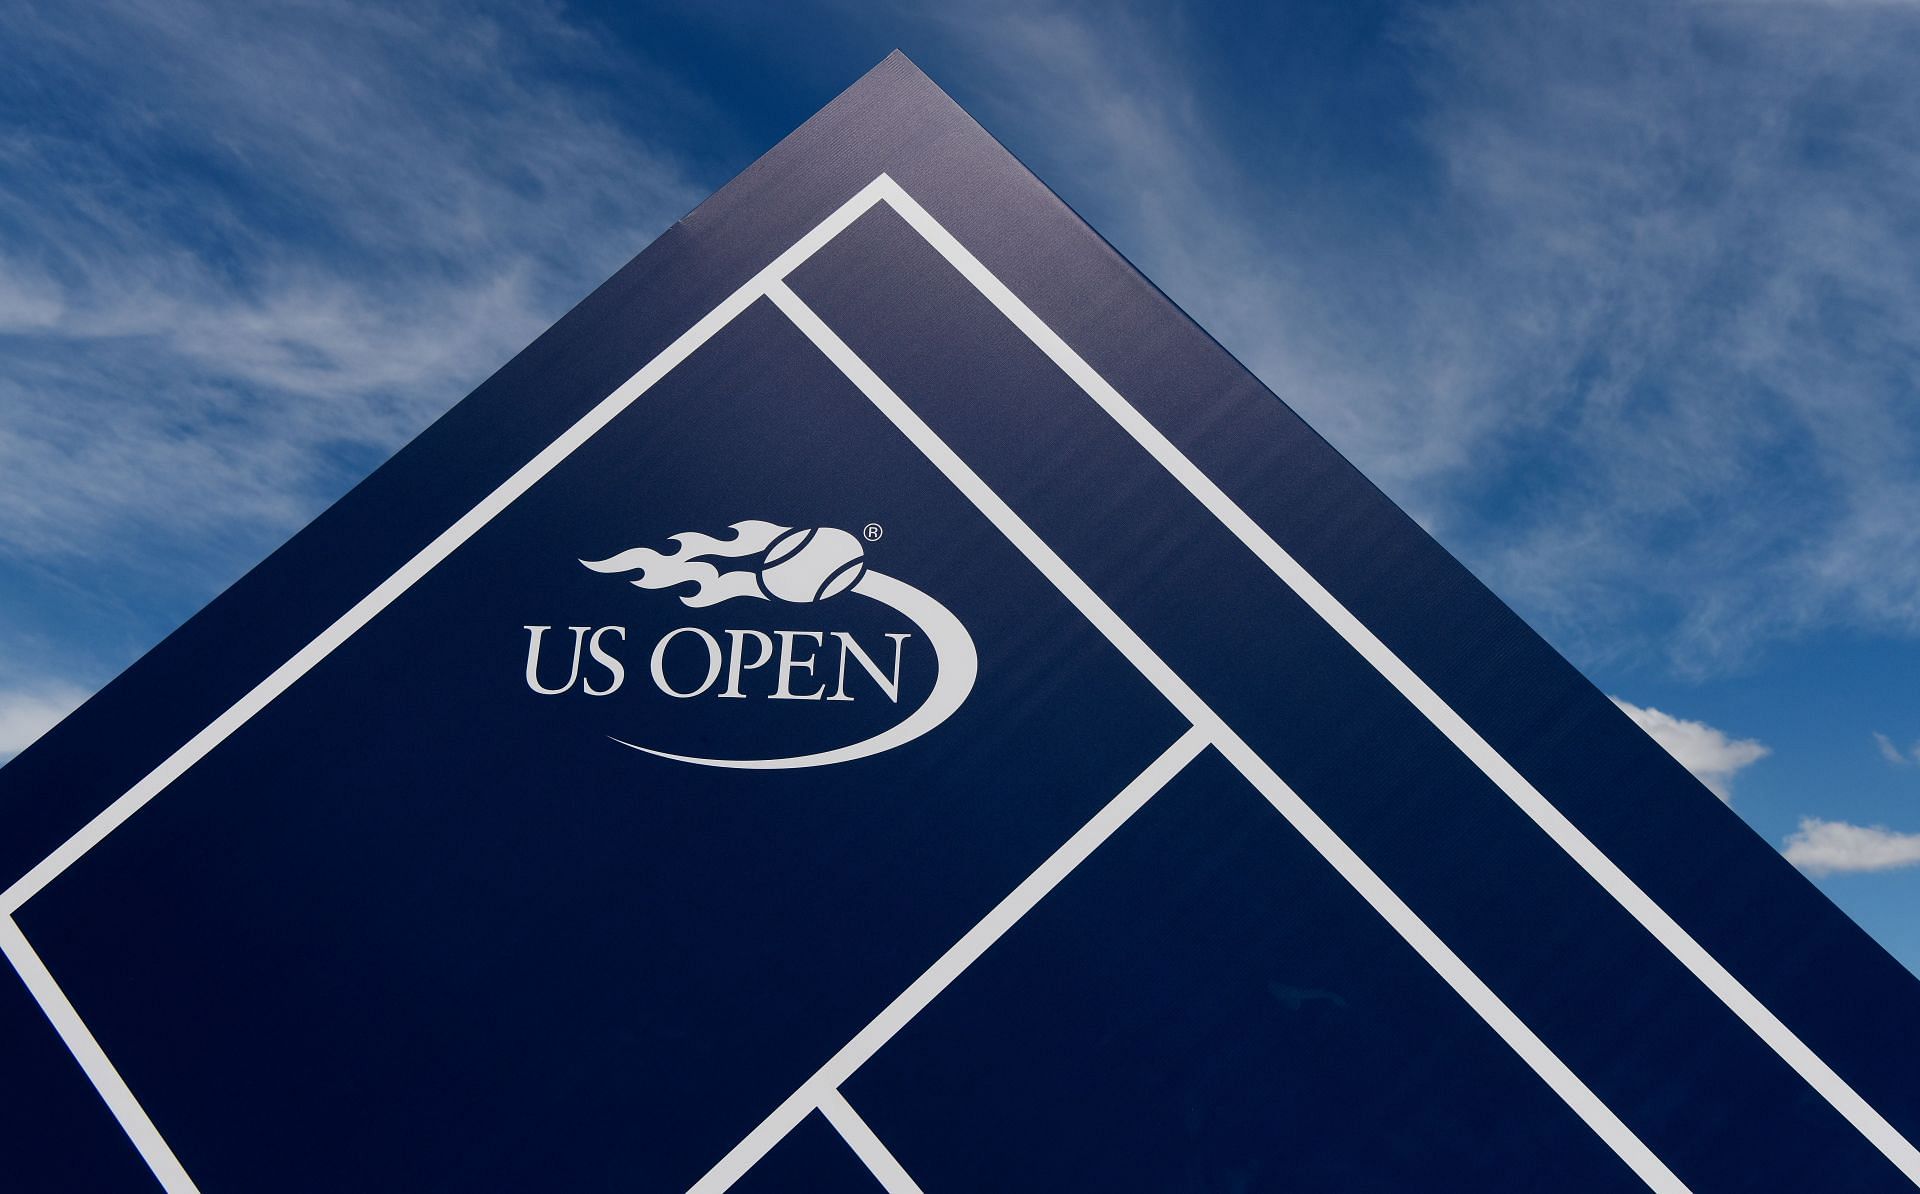 The US Open is the only Grand Slam that uses different tennis balls for men and women.